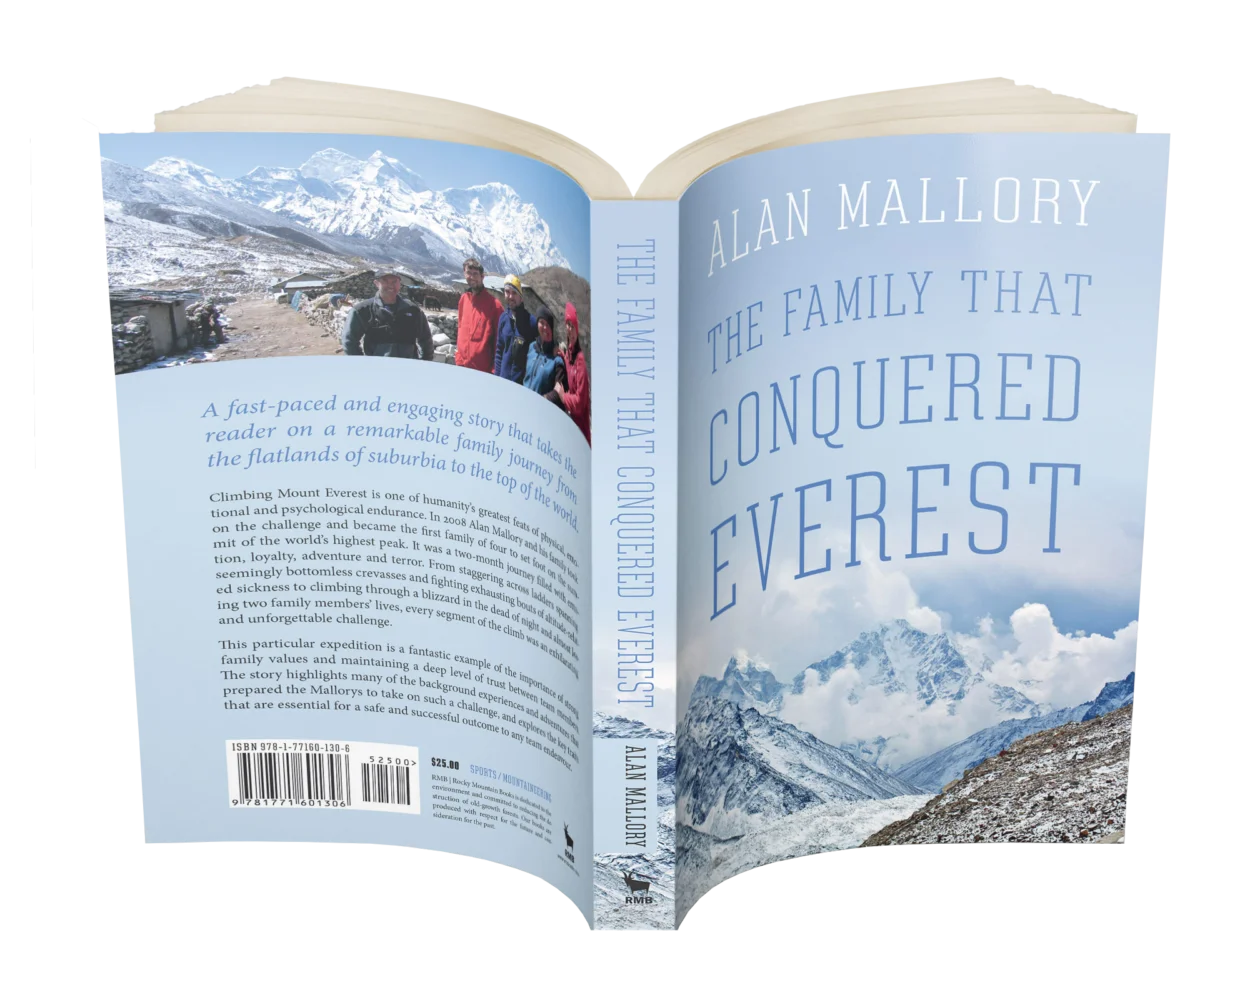 Alan Mallory - The Family that Conquered Everest